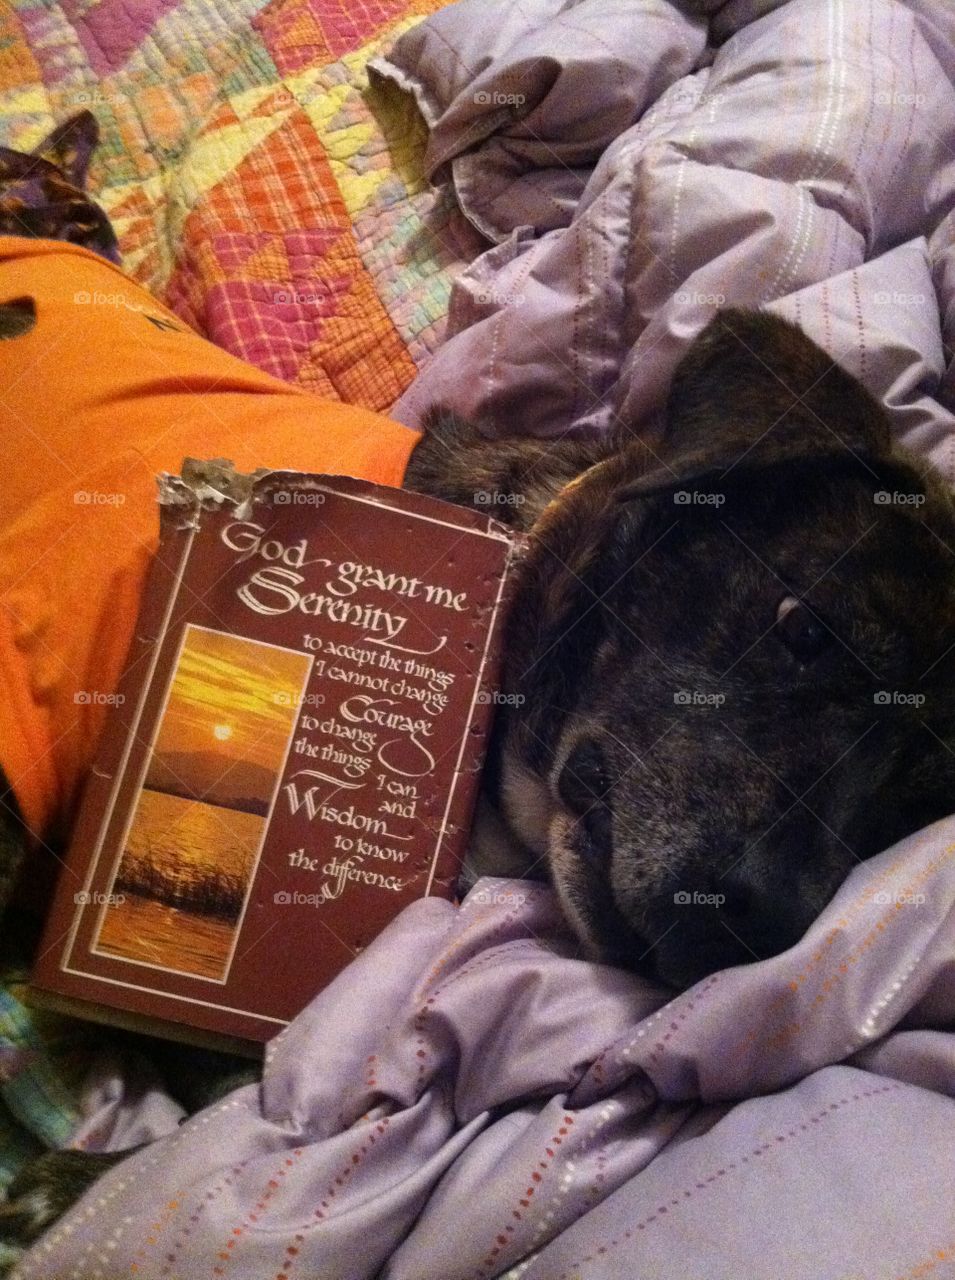 Dog posing with the serenity prayer book that she chewed